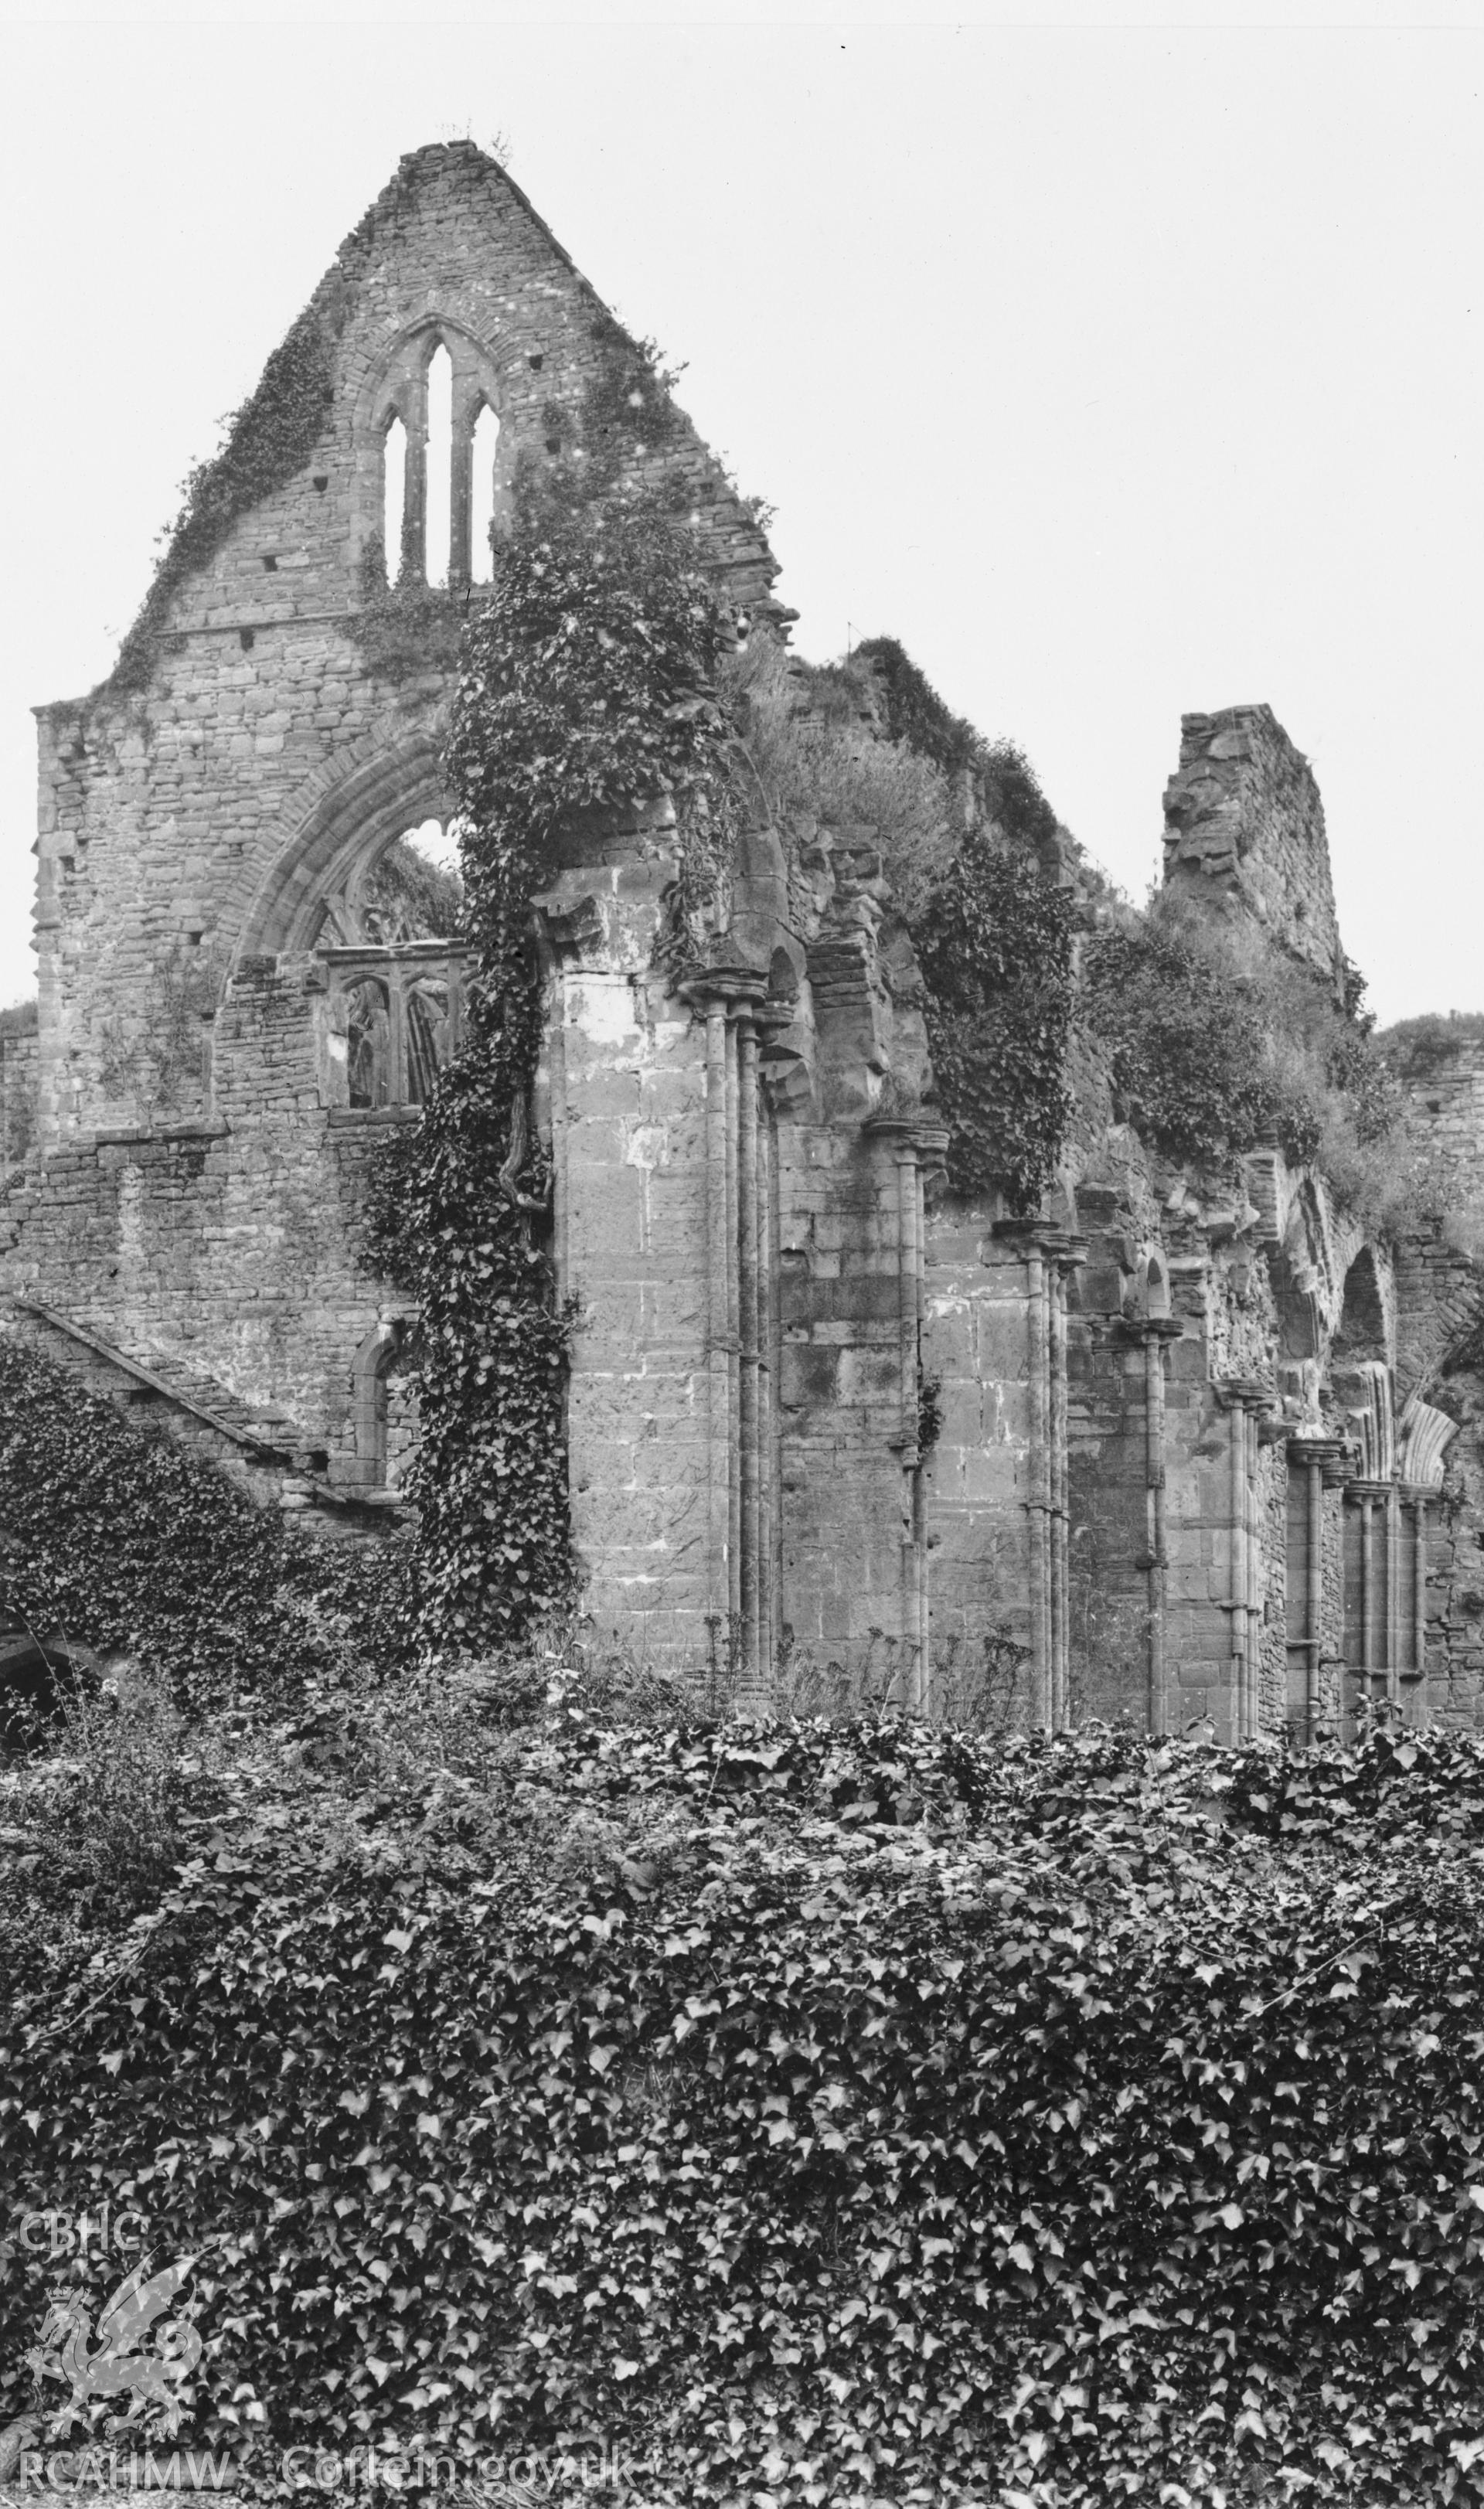 General view of Tintern Abbey.